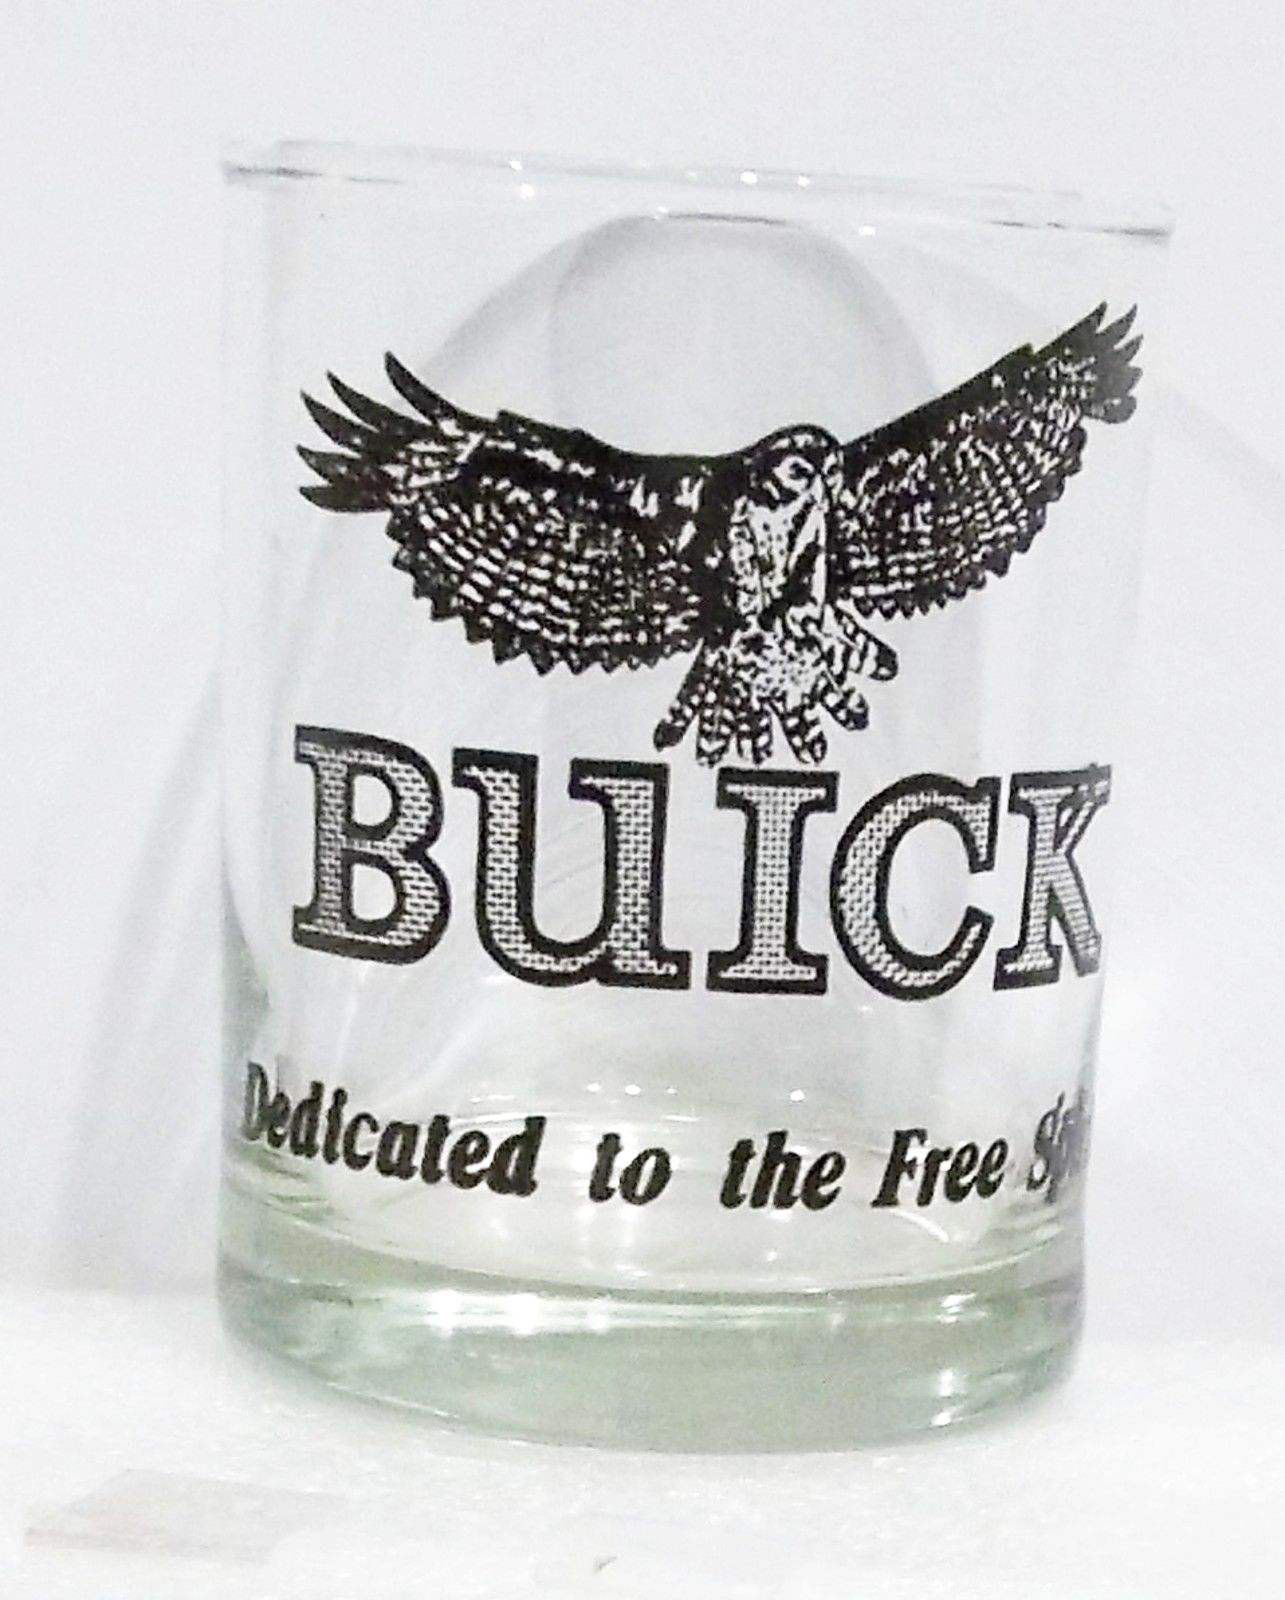 Buick Drinkware & Related